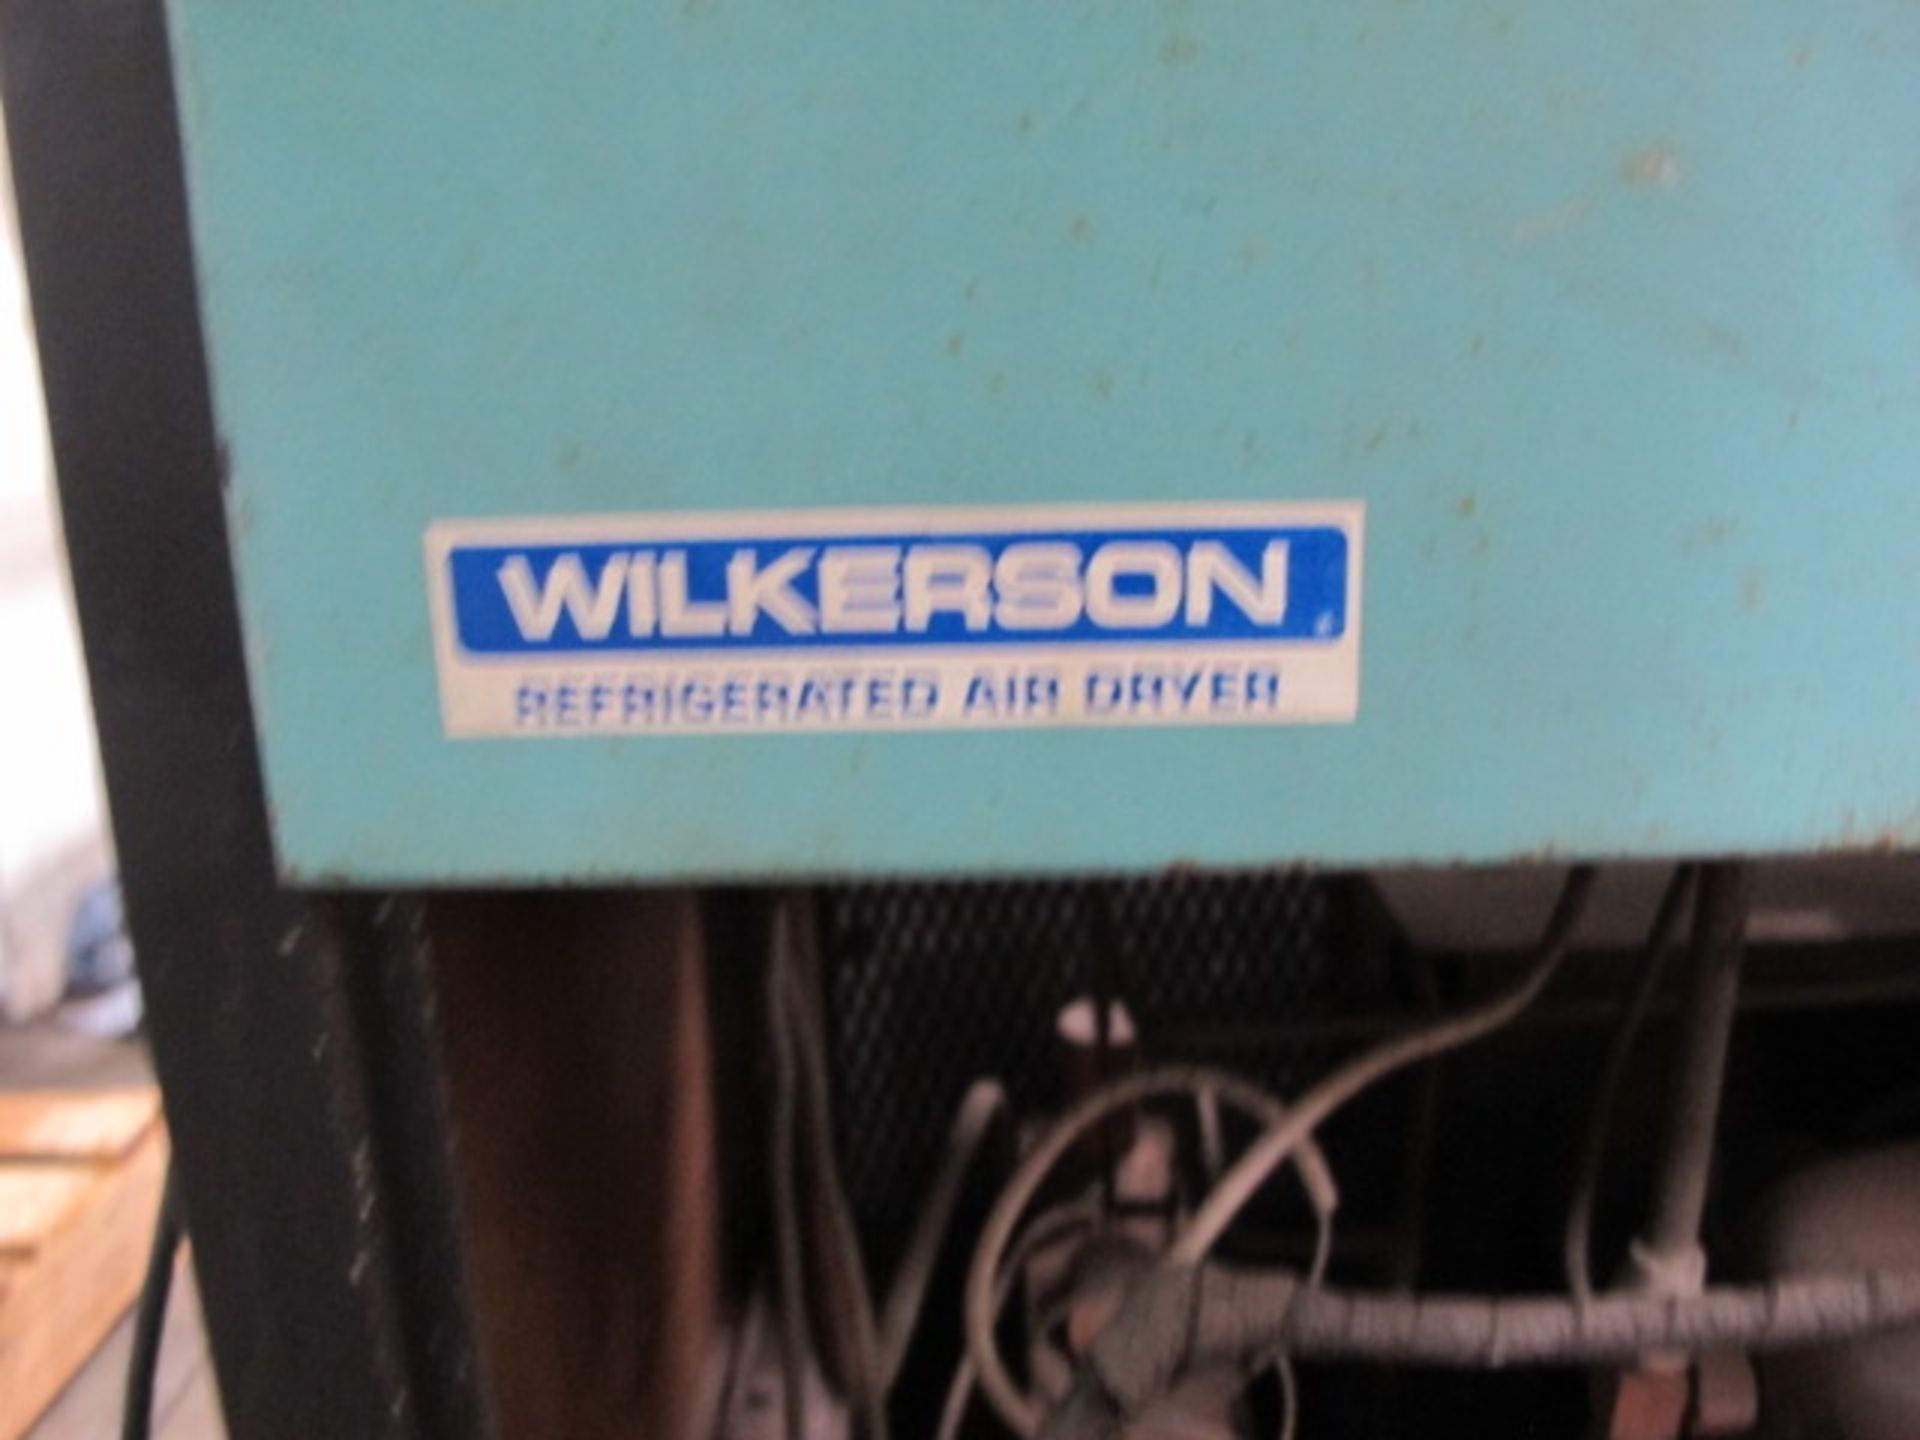 Wilkerson Refrigerated Air Dryer - Image 4 of 4